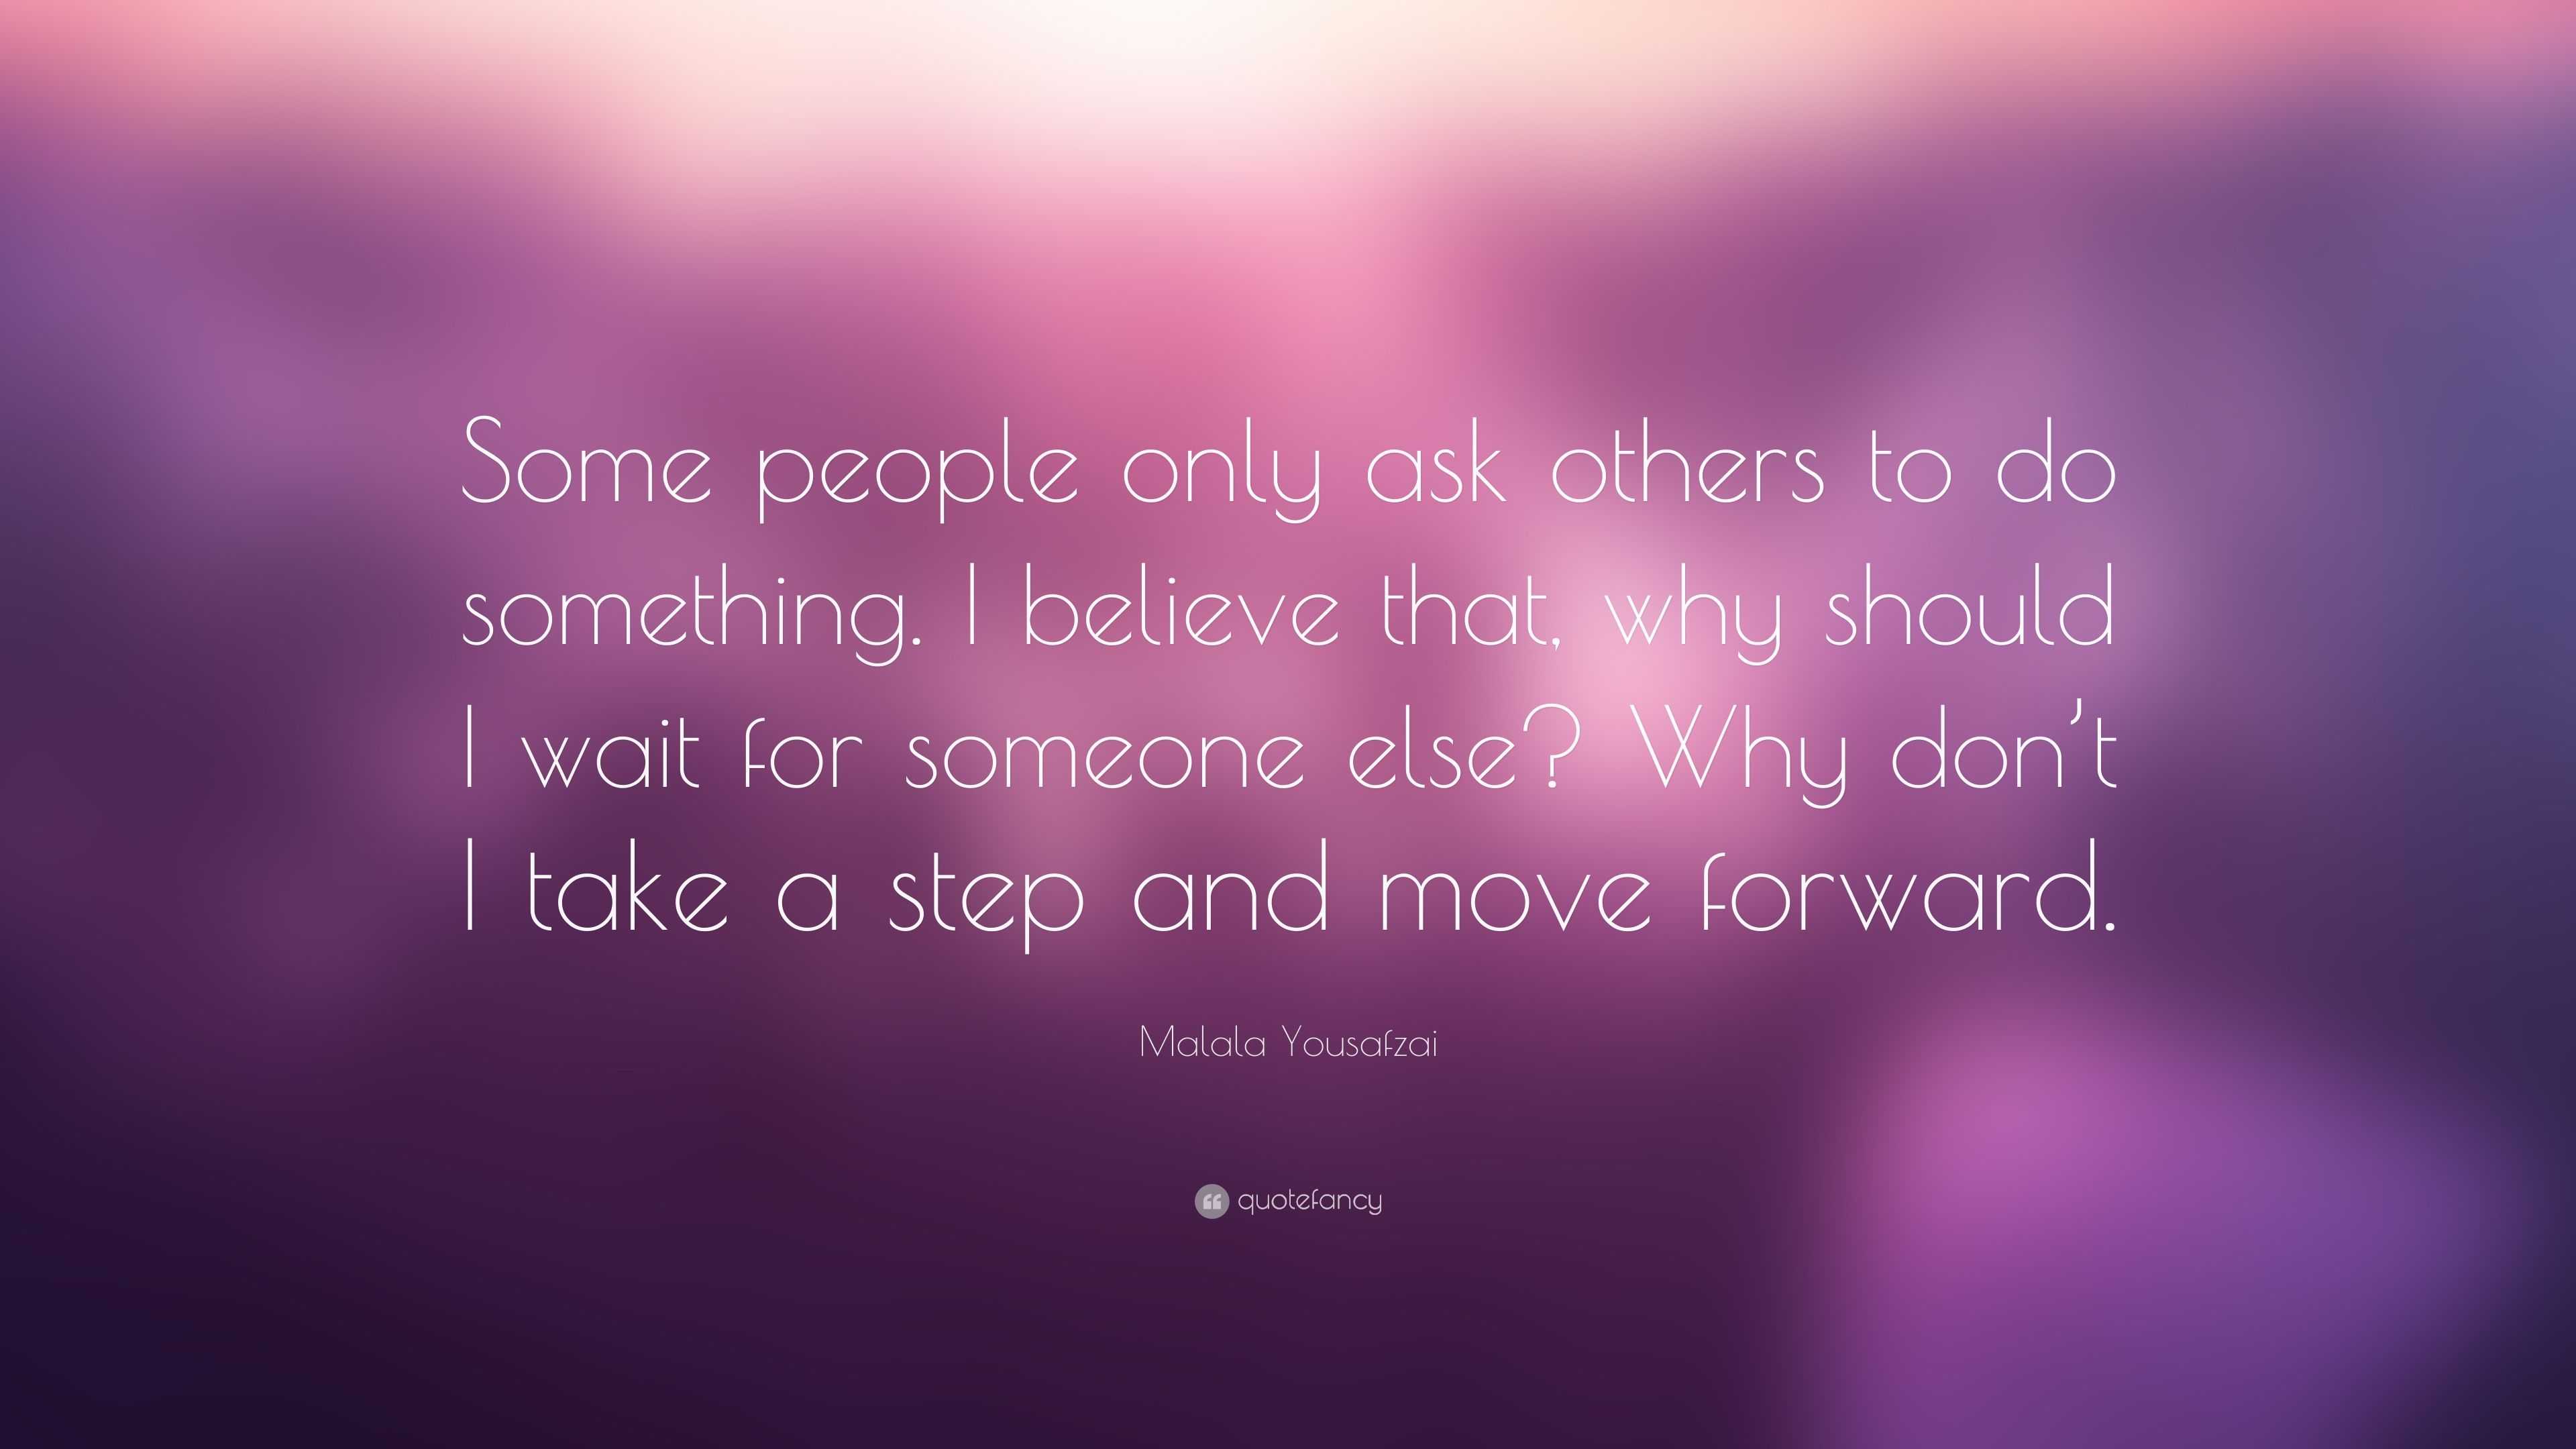 Malala Yousafzai Quote: “Some people only ask others to do something. I ...